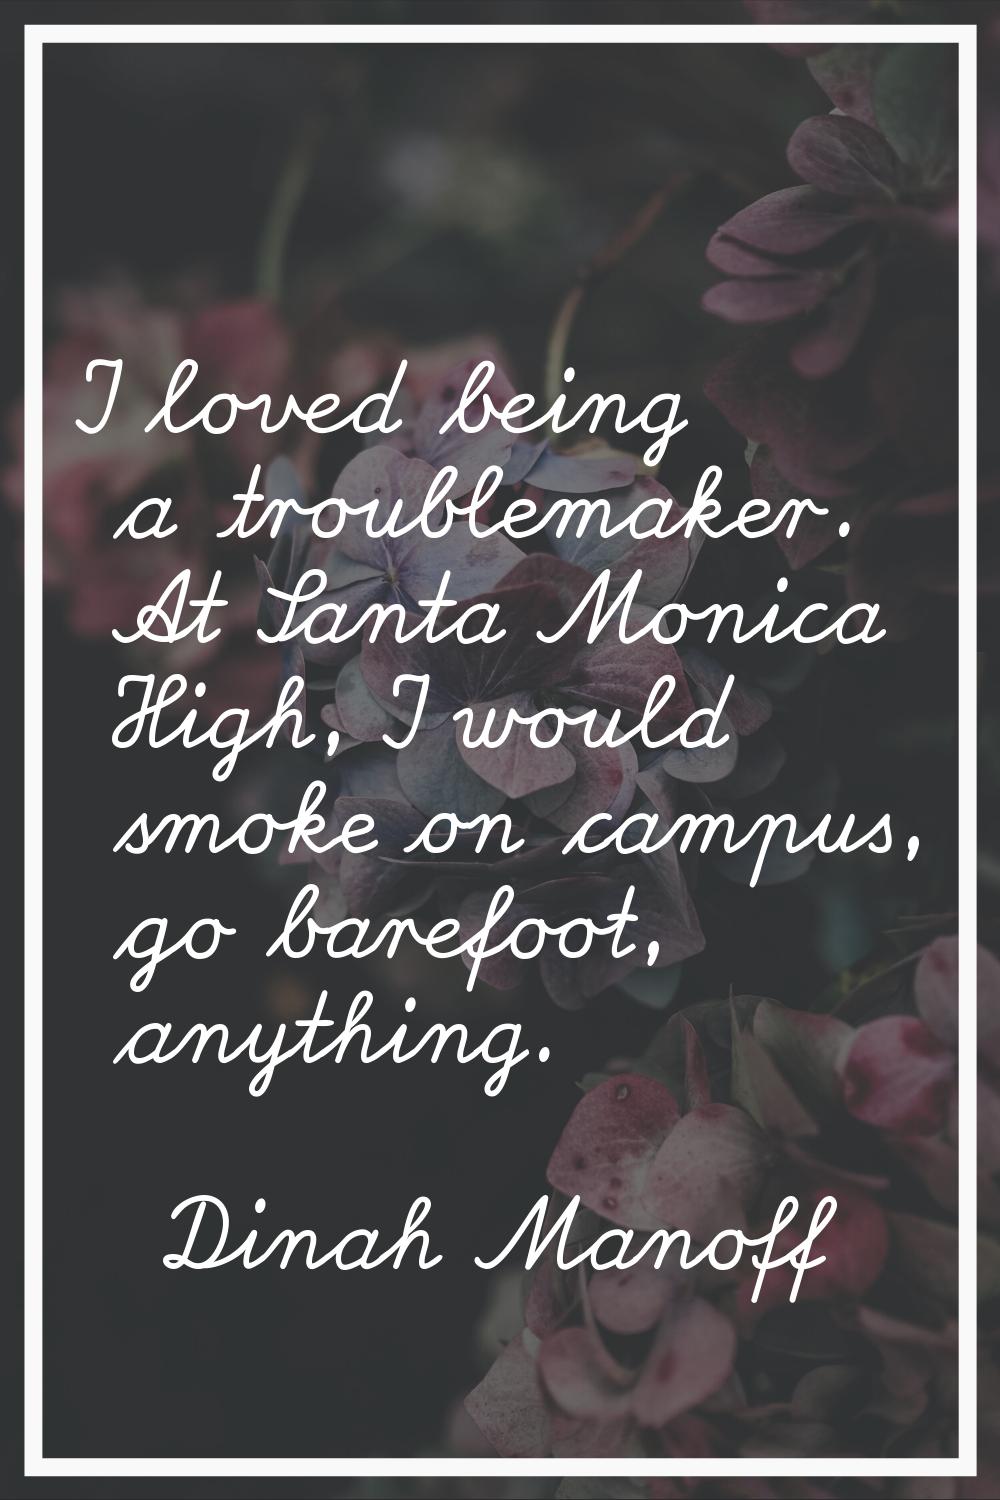 I loved being a troublemaker. At Santa Monica High, I would smoke on campus, go barefoot, anything.